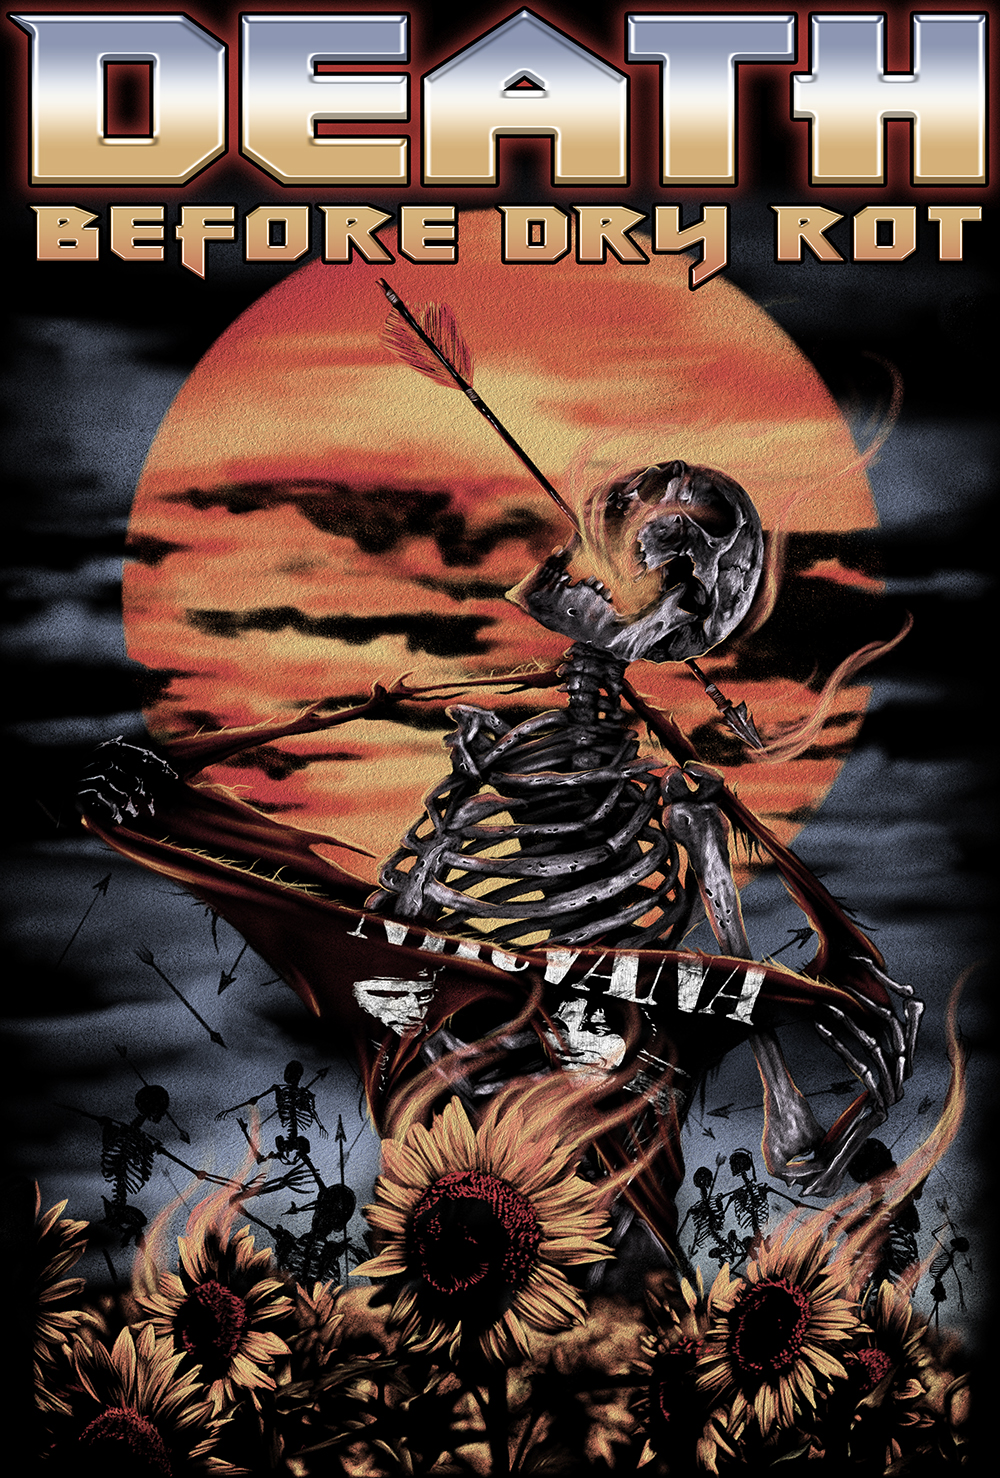 Death Before Dry Rot t-shirt design